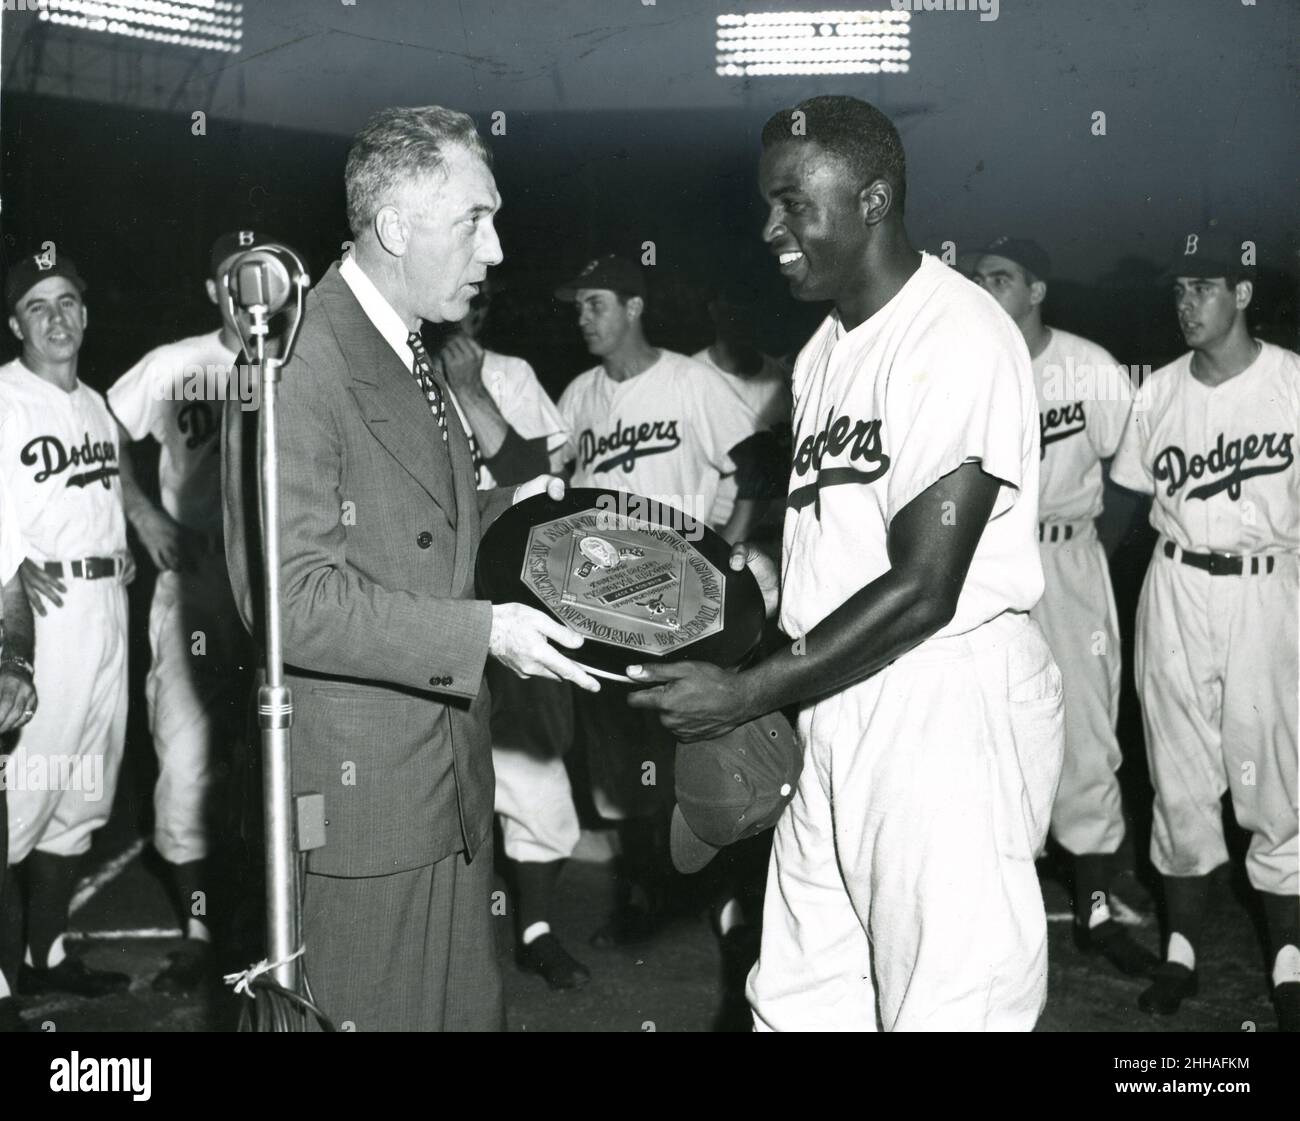 Brooklyn, New York, July 21, 1950 - Jackie Robinson (right) voted the most valuable player during the 1949 National League baseball season, receives the award given annually to the player chosen by Baseball Writers' Association of America as the most valuable in the League. Ford Frick, president of the National League makes the presentation. Stock Photo